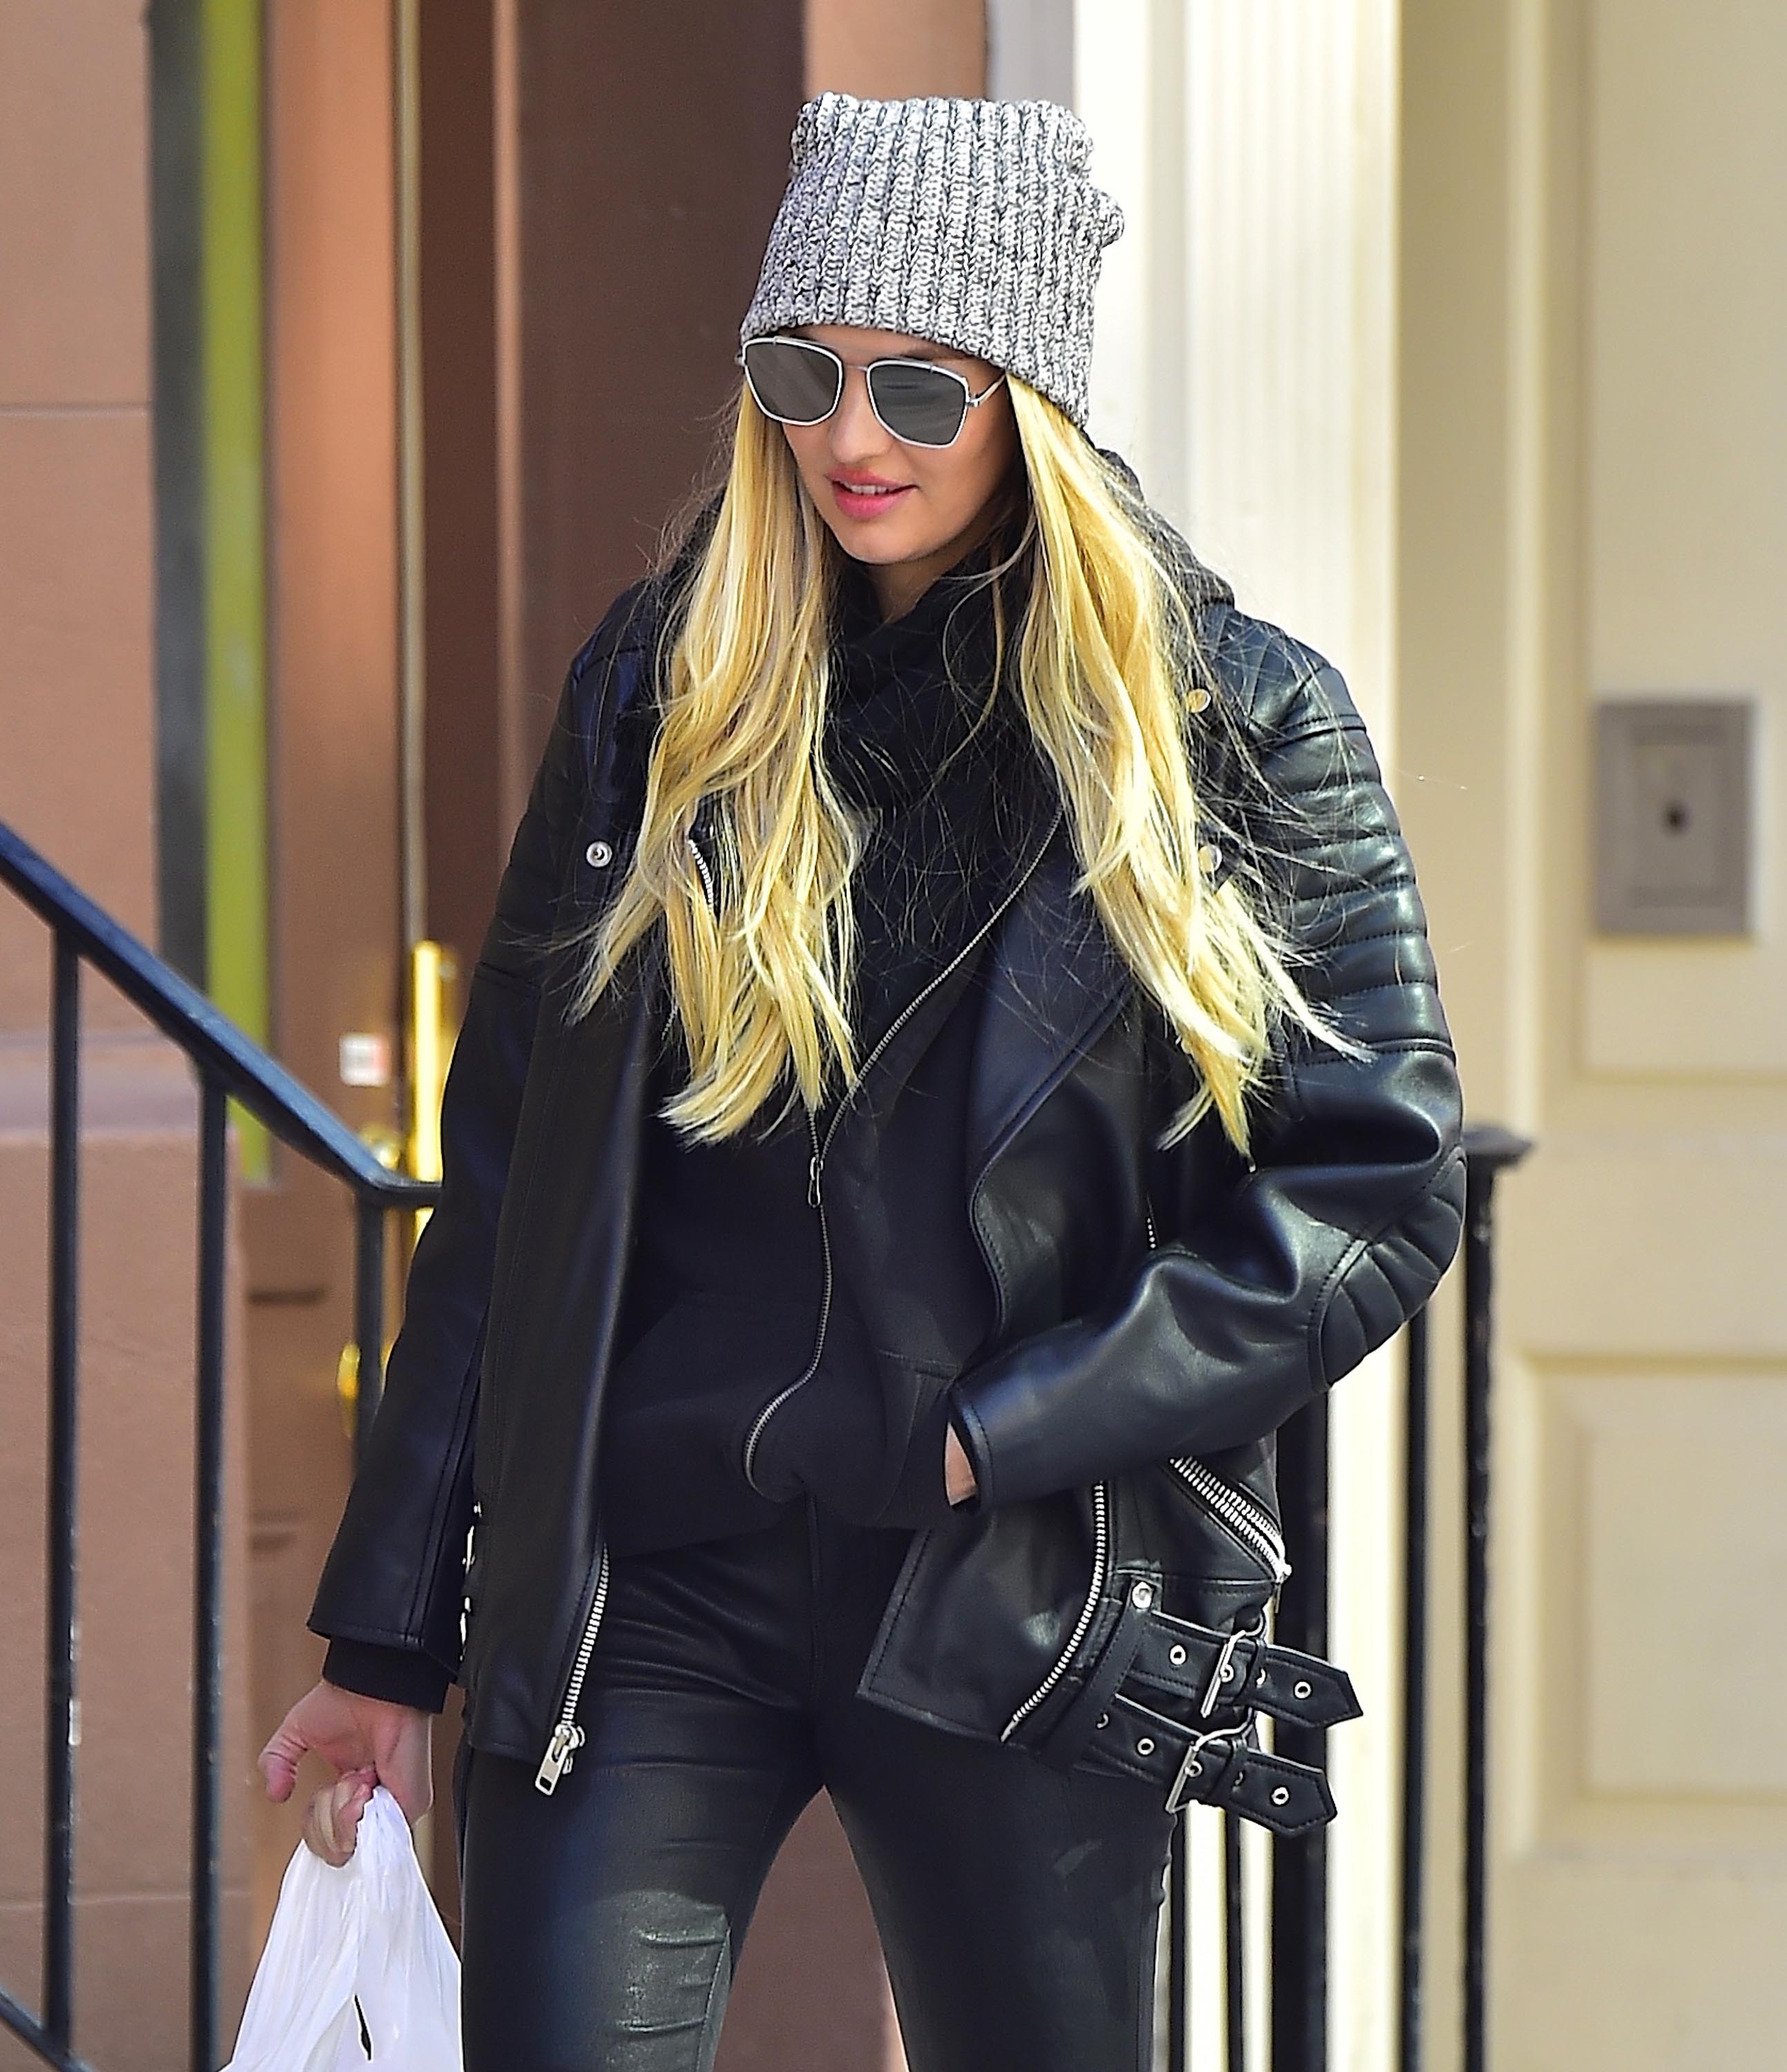 Candice Swanepoel shopping in NYC